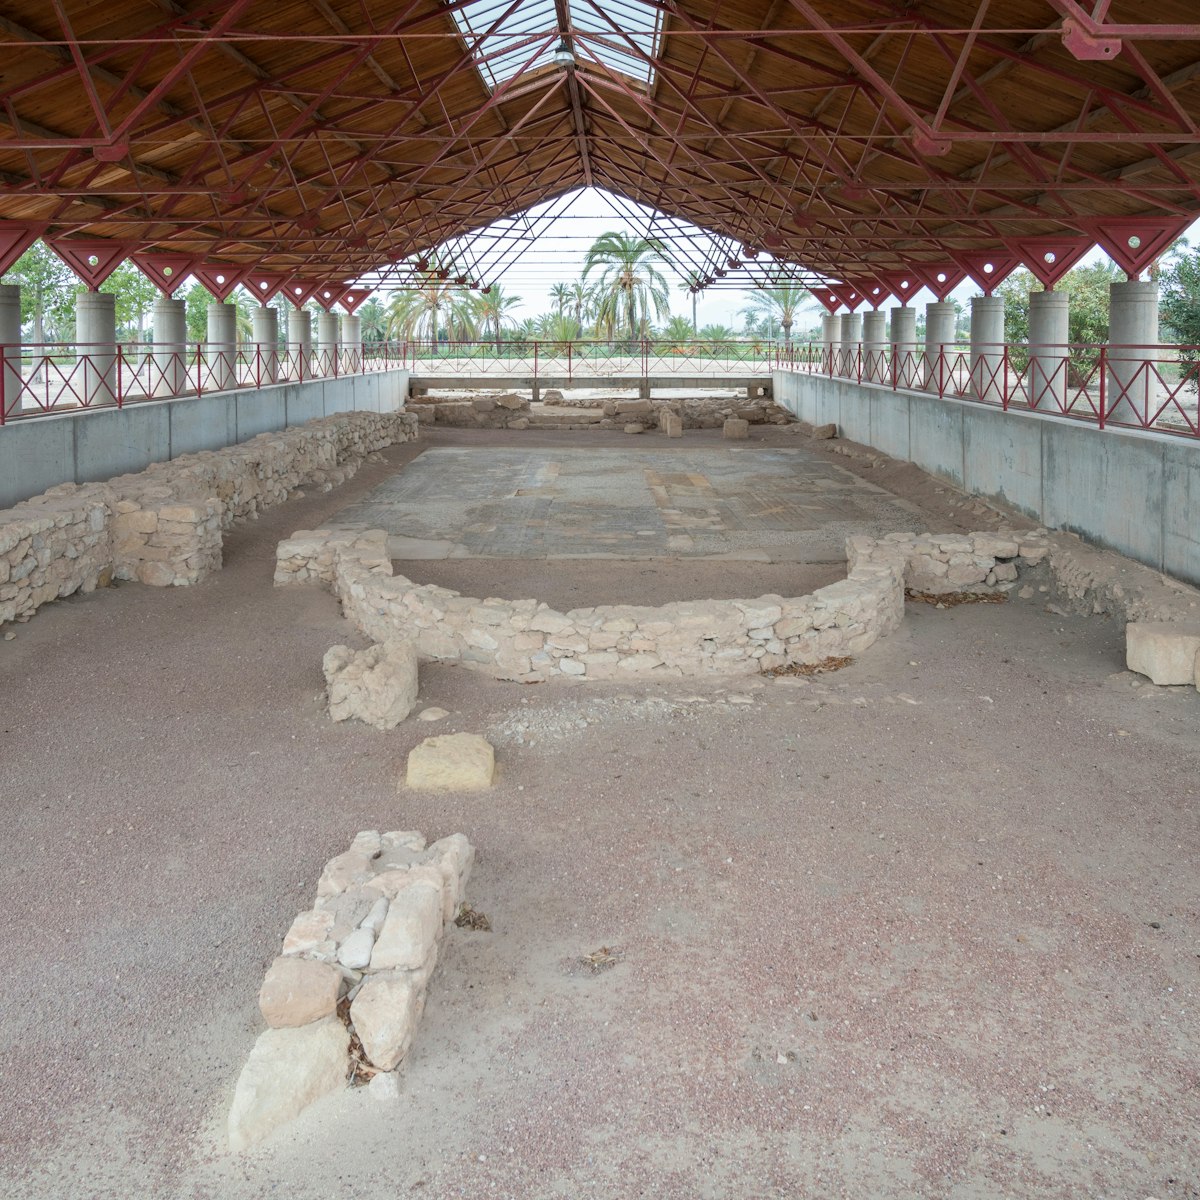 Roman basilica at the archaeological excavations and museum at La Alcudia in Elche, Spain.